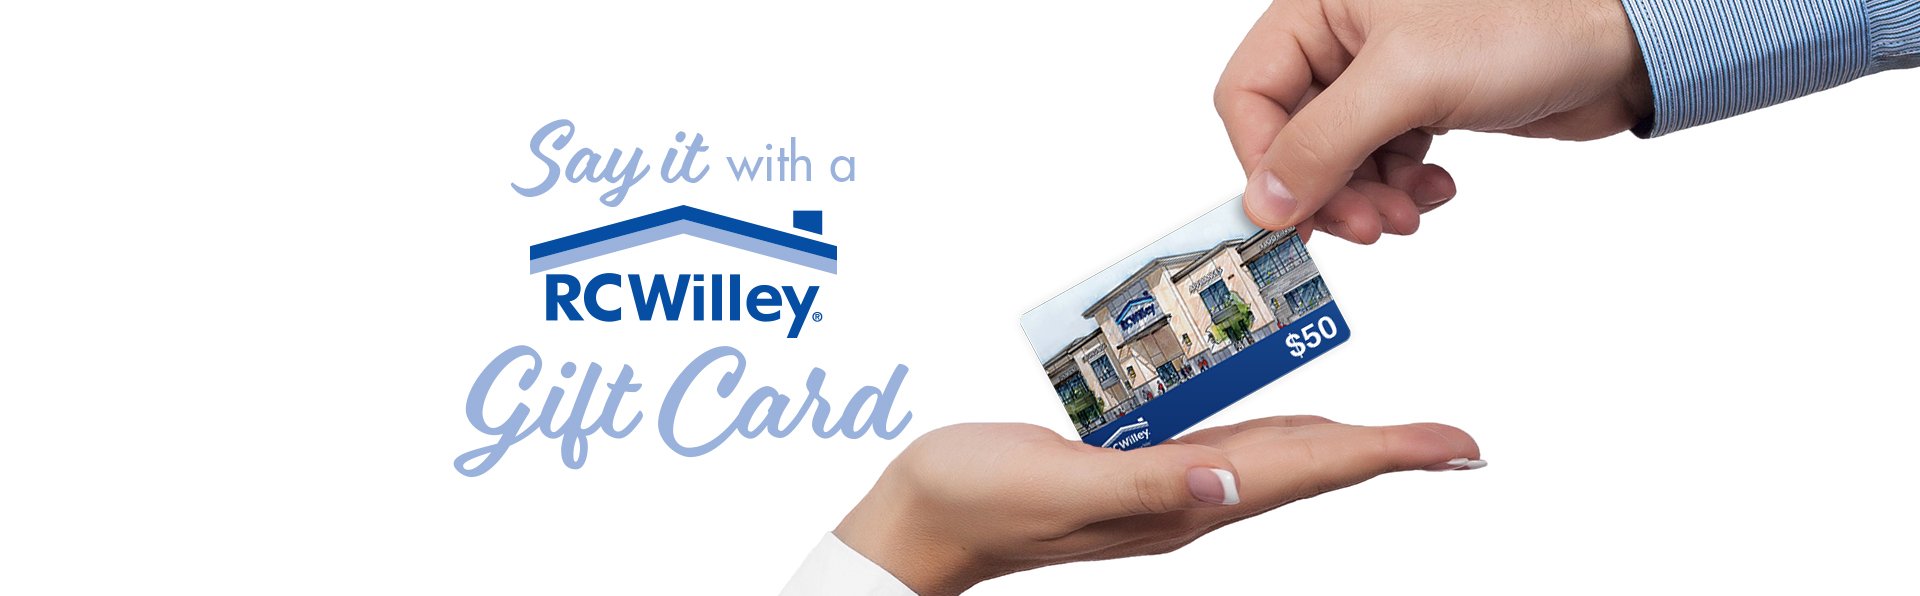 Say it with an RC Willey gift card